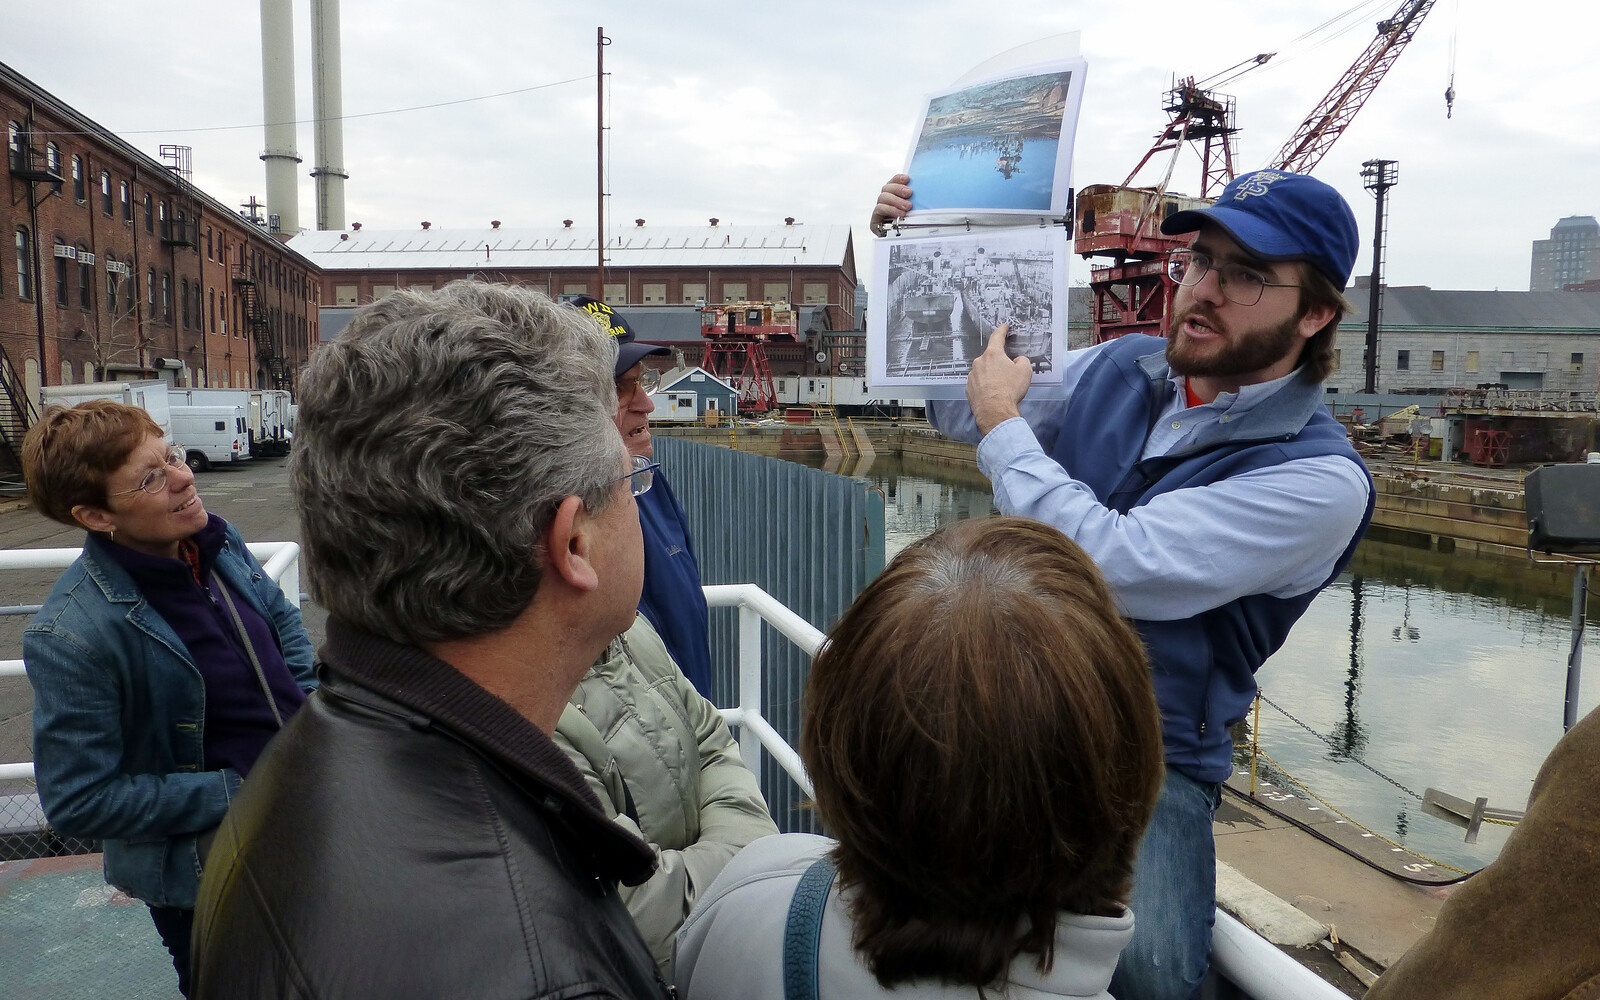 A tour guide points at a black and white photo of two ships as guests look on. They are on a platform that looks out onto a water-filled dry dock that has a red rusty crane next to it.